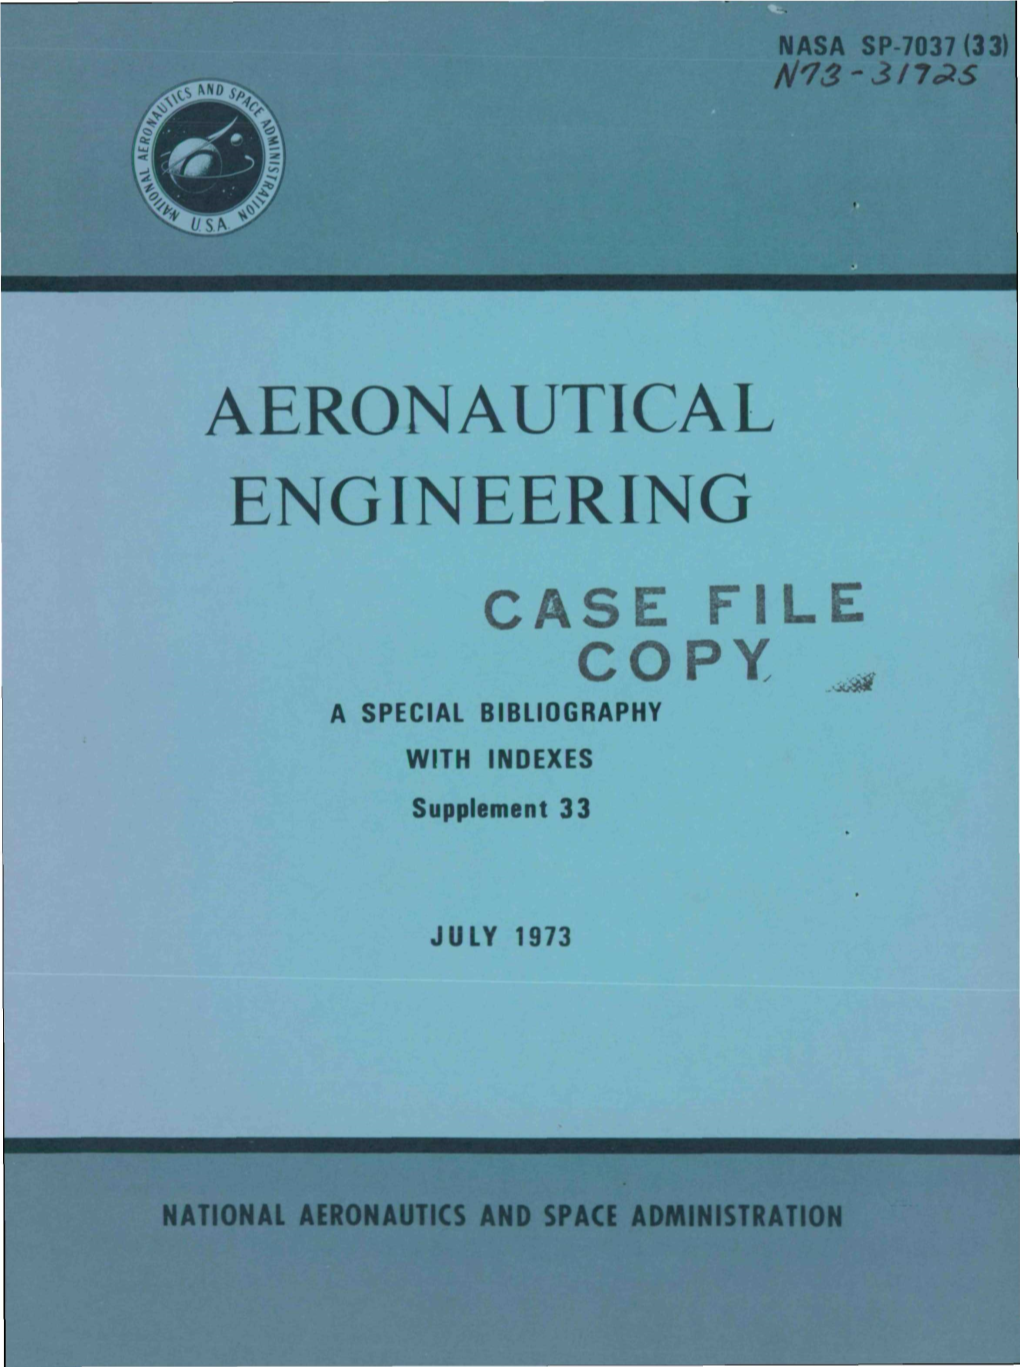 AERONAUTICAL ENGINEERING CASE FILE COPY ^ a SPECIAL BIBLIOGRAPHY with INDEXES Supplement 33